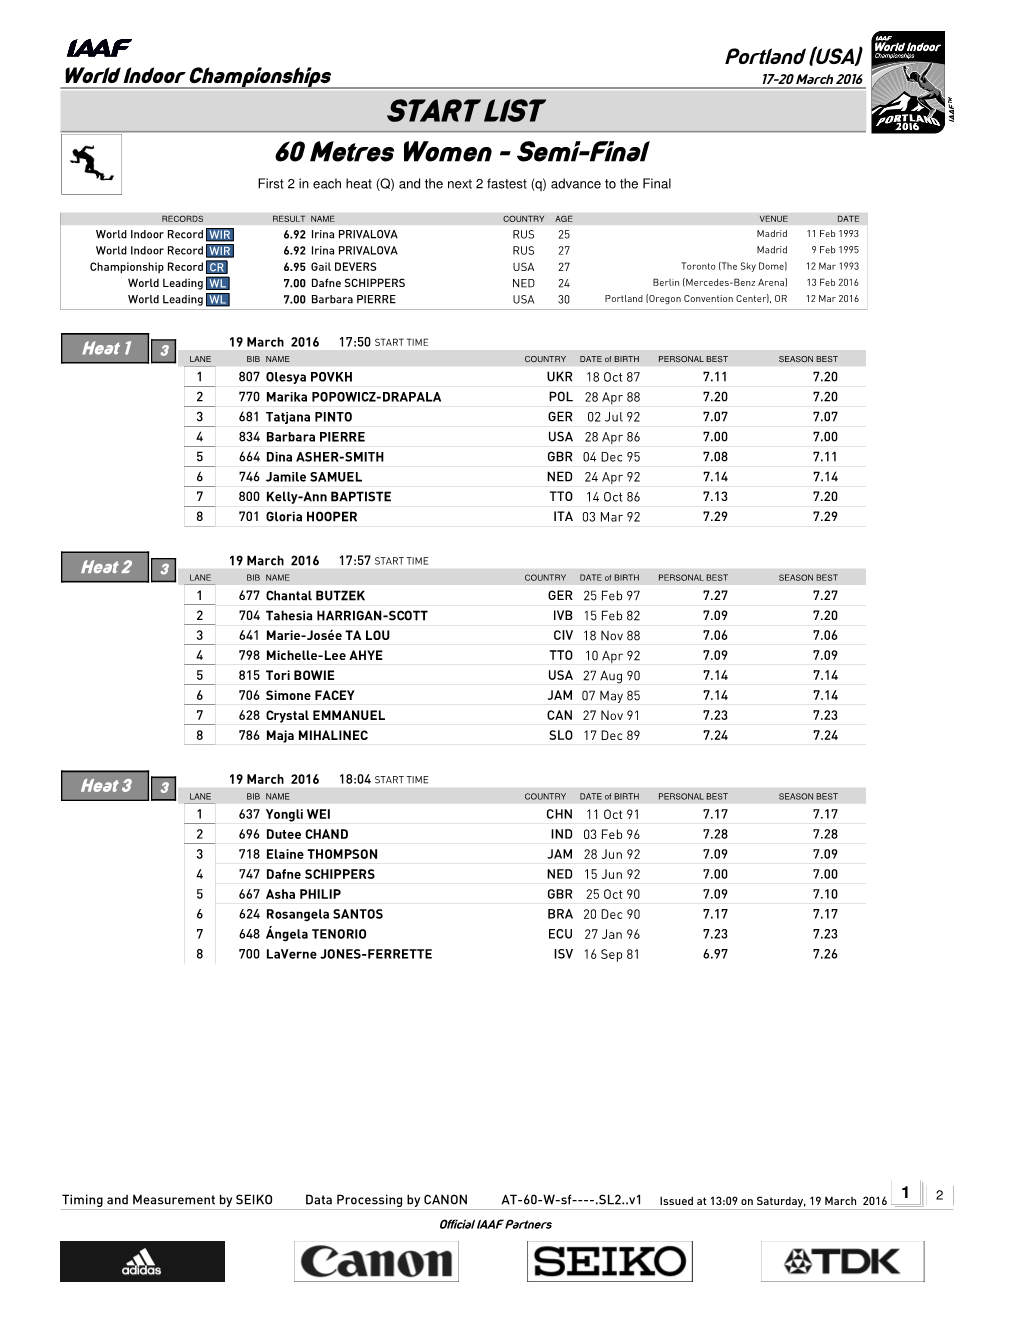 START LIST 60 Metres Women - Semi-Final First 2 in Each Heat (Q) and the Next 2 Fastest (Q) Advance to the Final